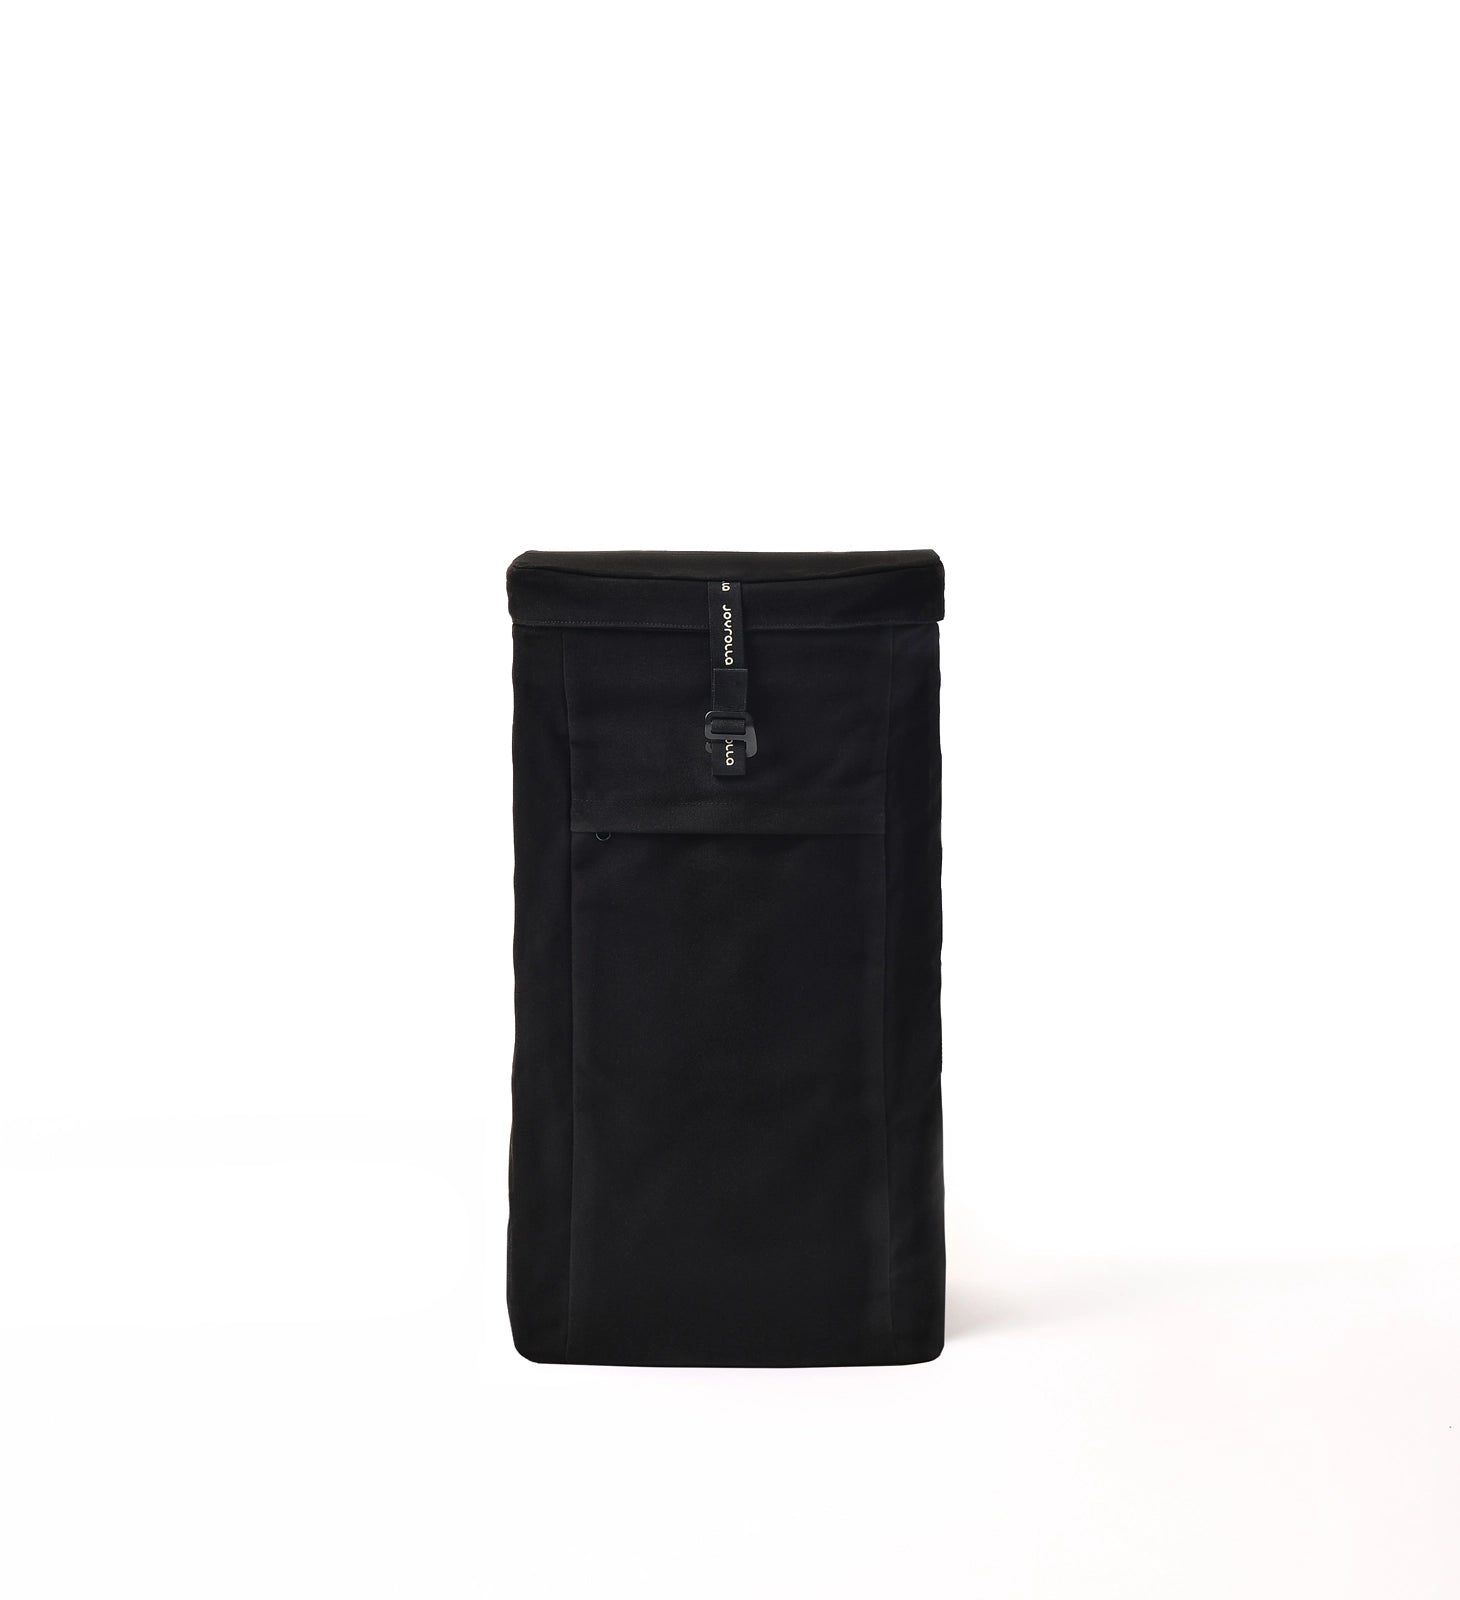 "Alt text: The black Joyrolla Cart bag, featuring a spacious and durable design for versatile usage. The bag is made from high-quality materials, providing ample storage space for groceries, supplies, or personal belongings. It includes multiple compartments and pockets for easy organization. The black color adds a sleek and modern touch to the bag's aesthetic. Designed to be used with the Joyrolla Cart, this bag offers practicality and convenience for carrying items during shopping or transportation tasks.